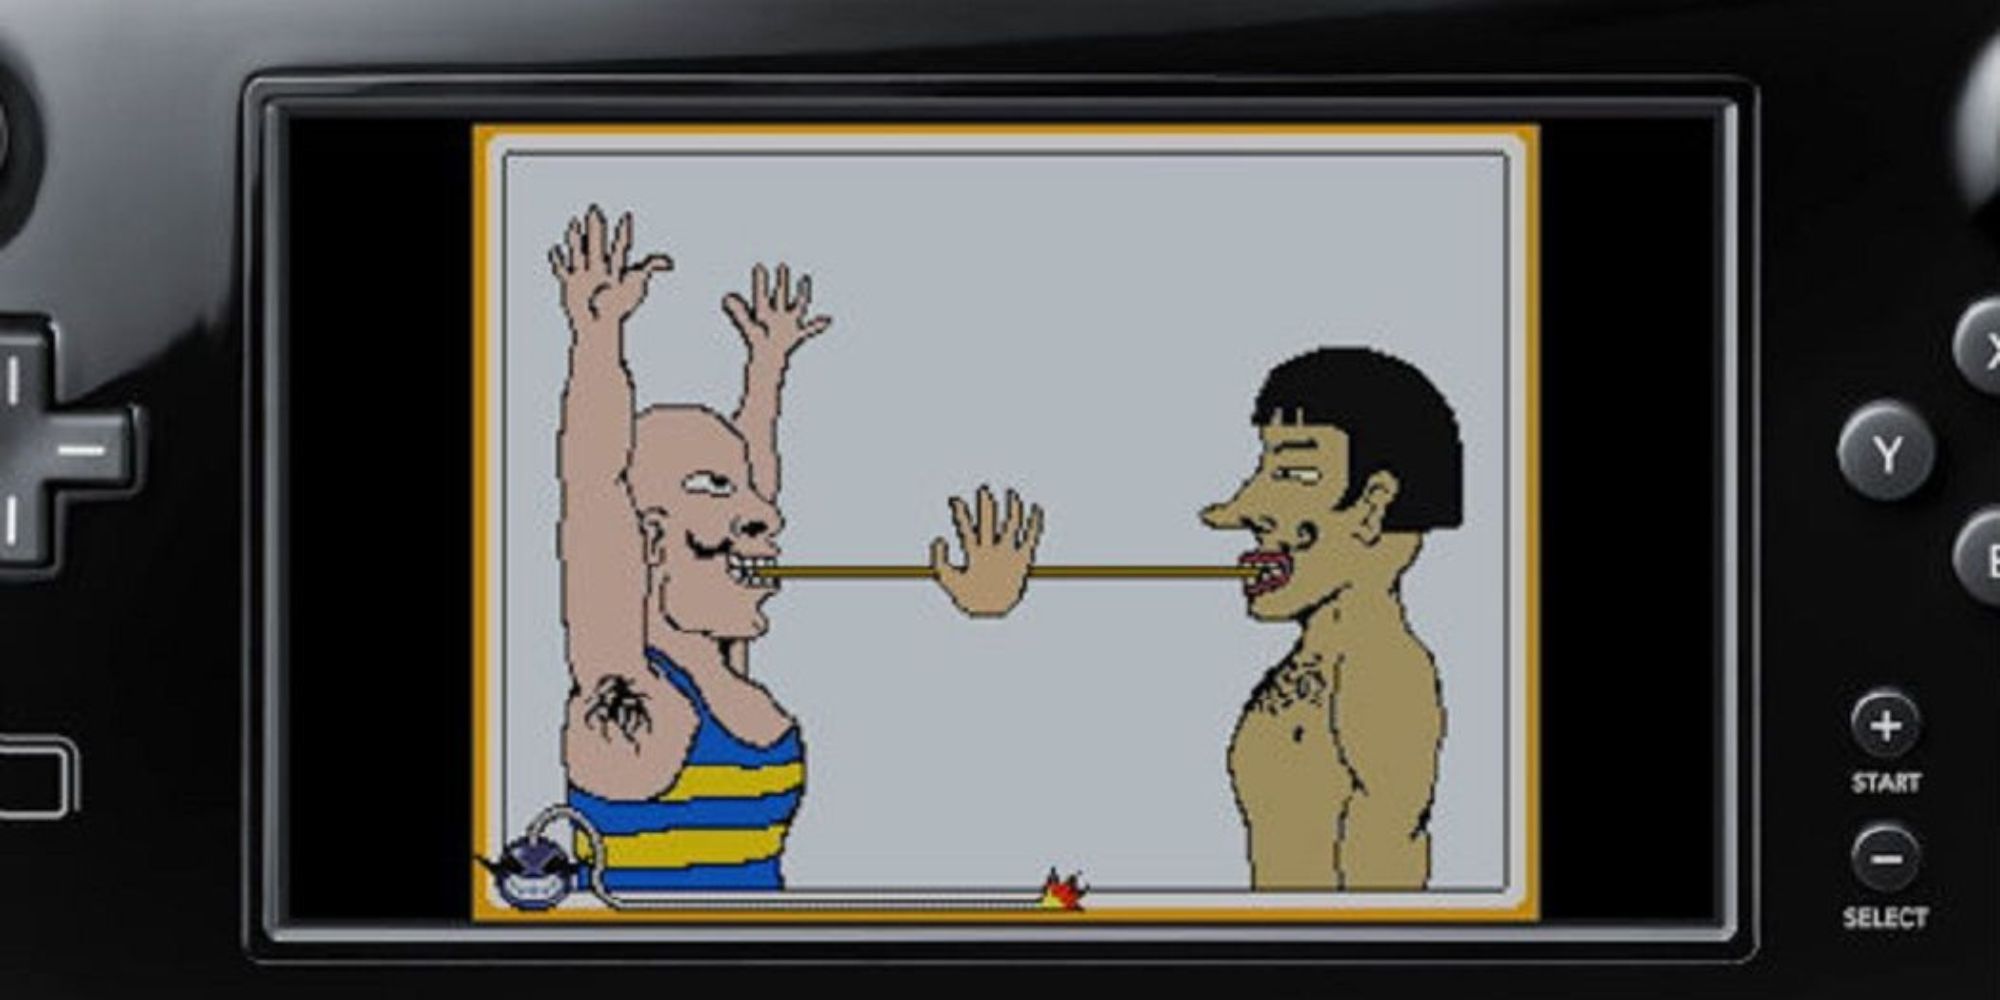 Two men bite on an elastic band in a microgame